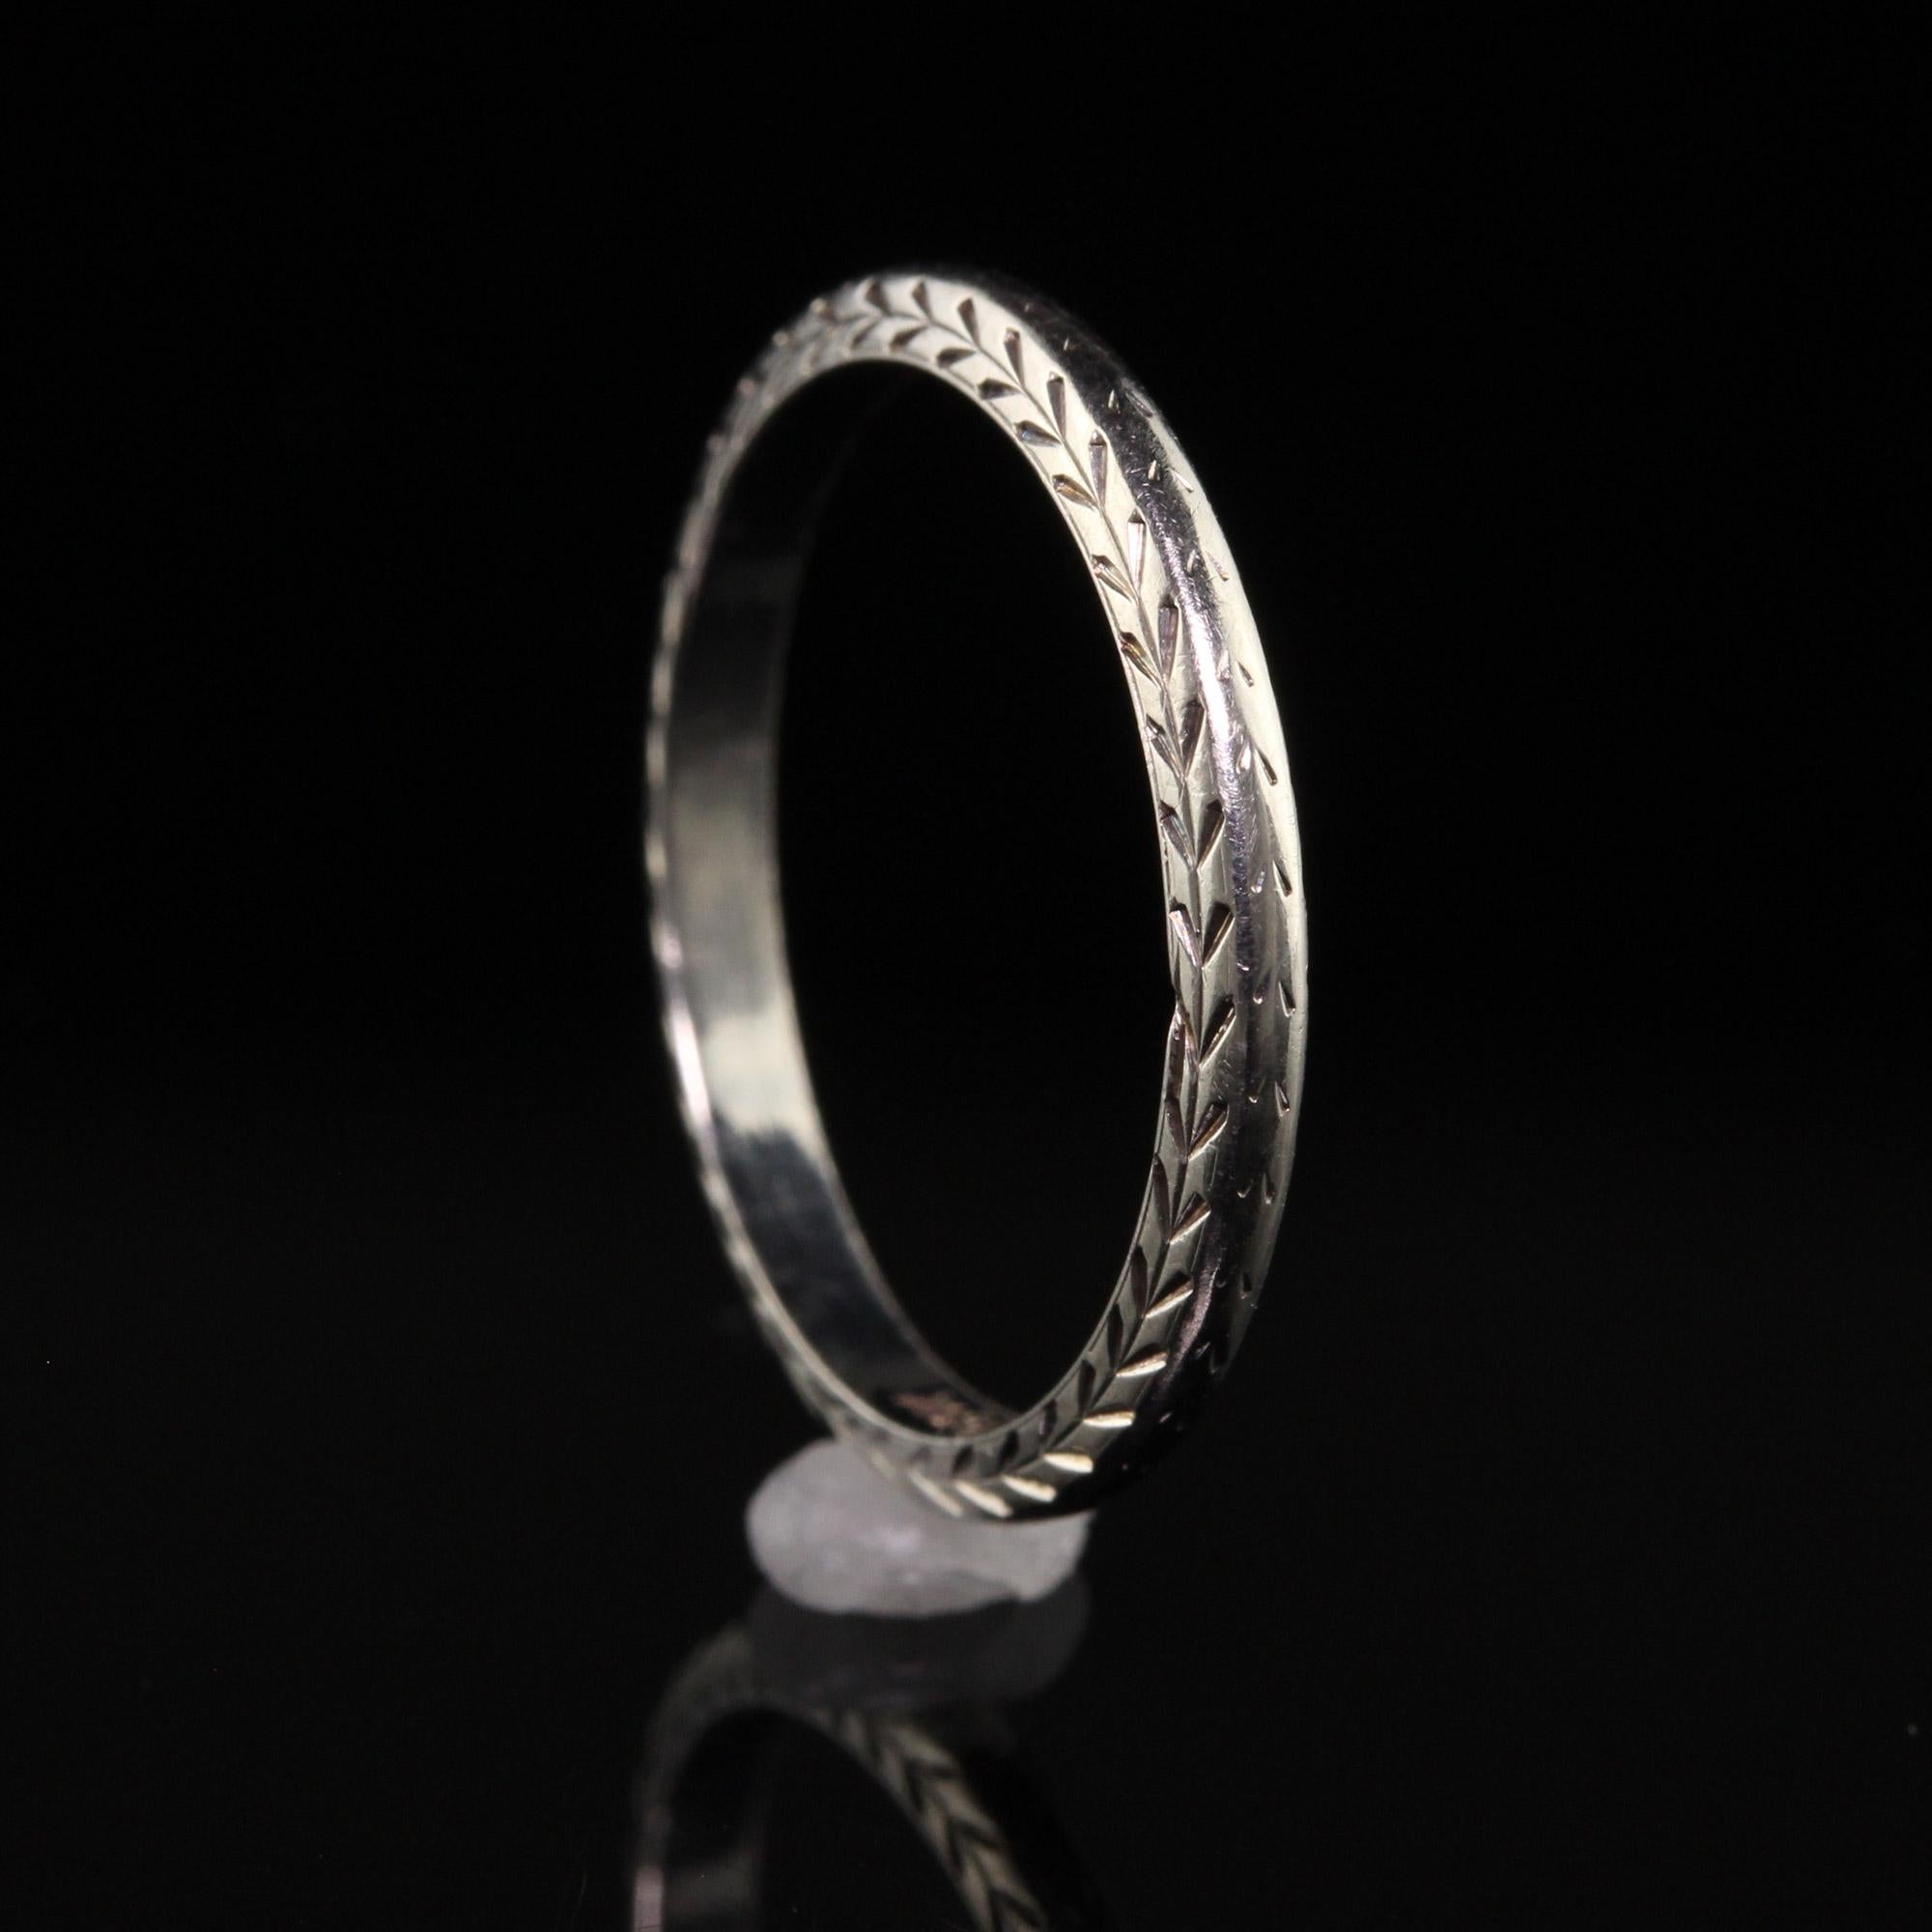 Antique Art Deco Belais 18k White Gold Engraved Wedding Band In Good Condition For Sale In Great Neck, NY